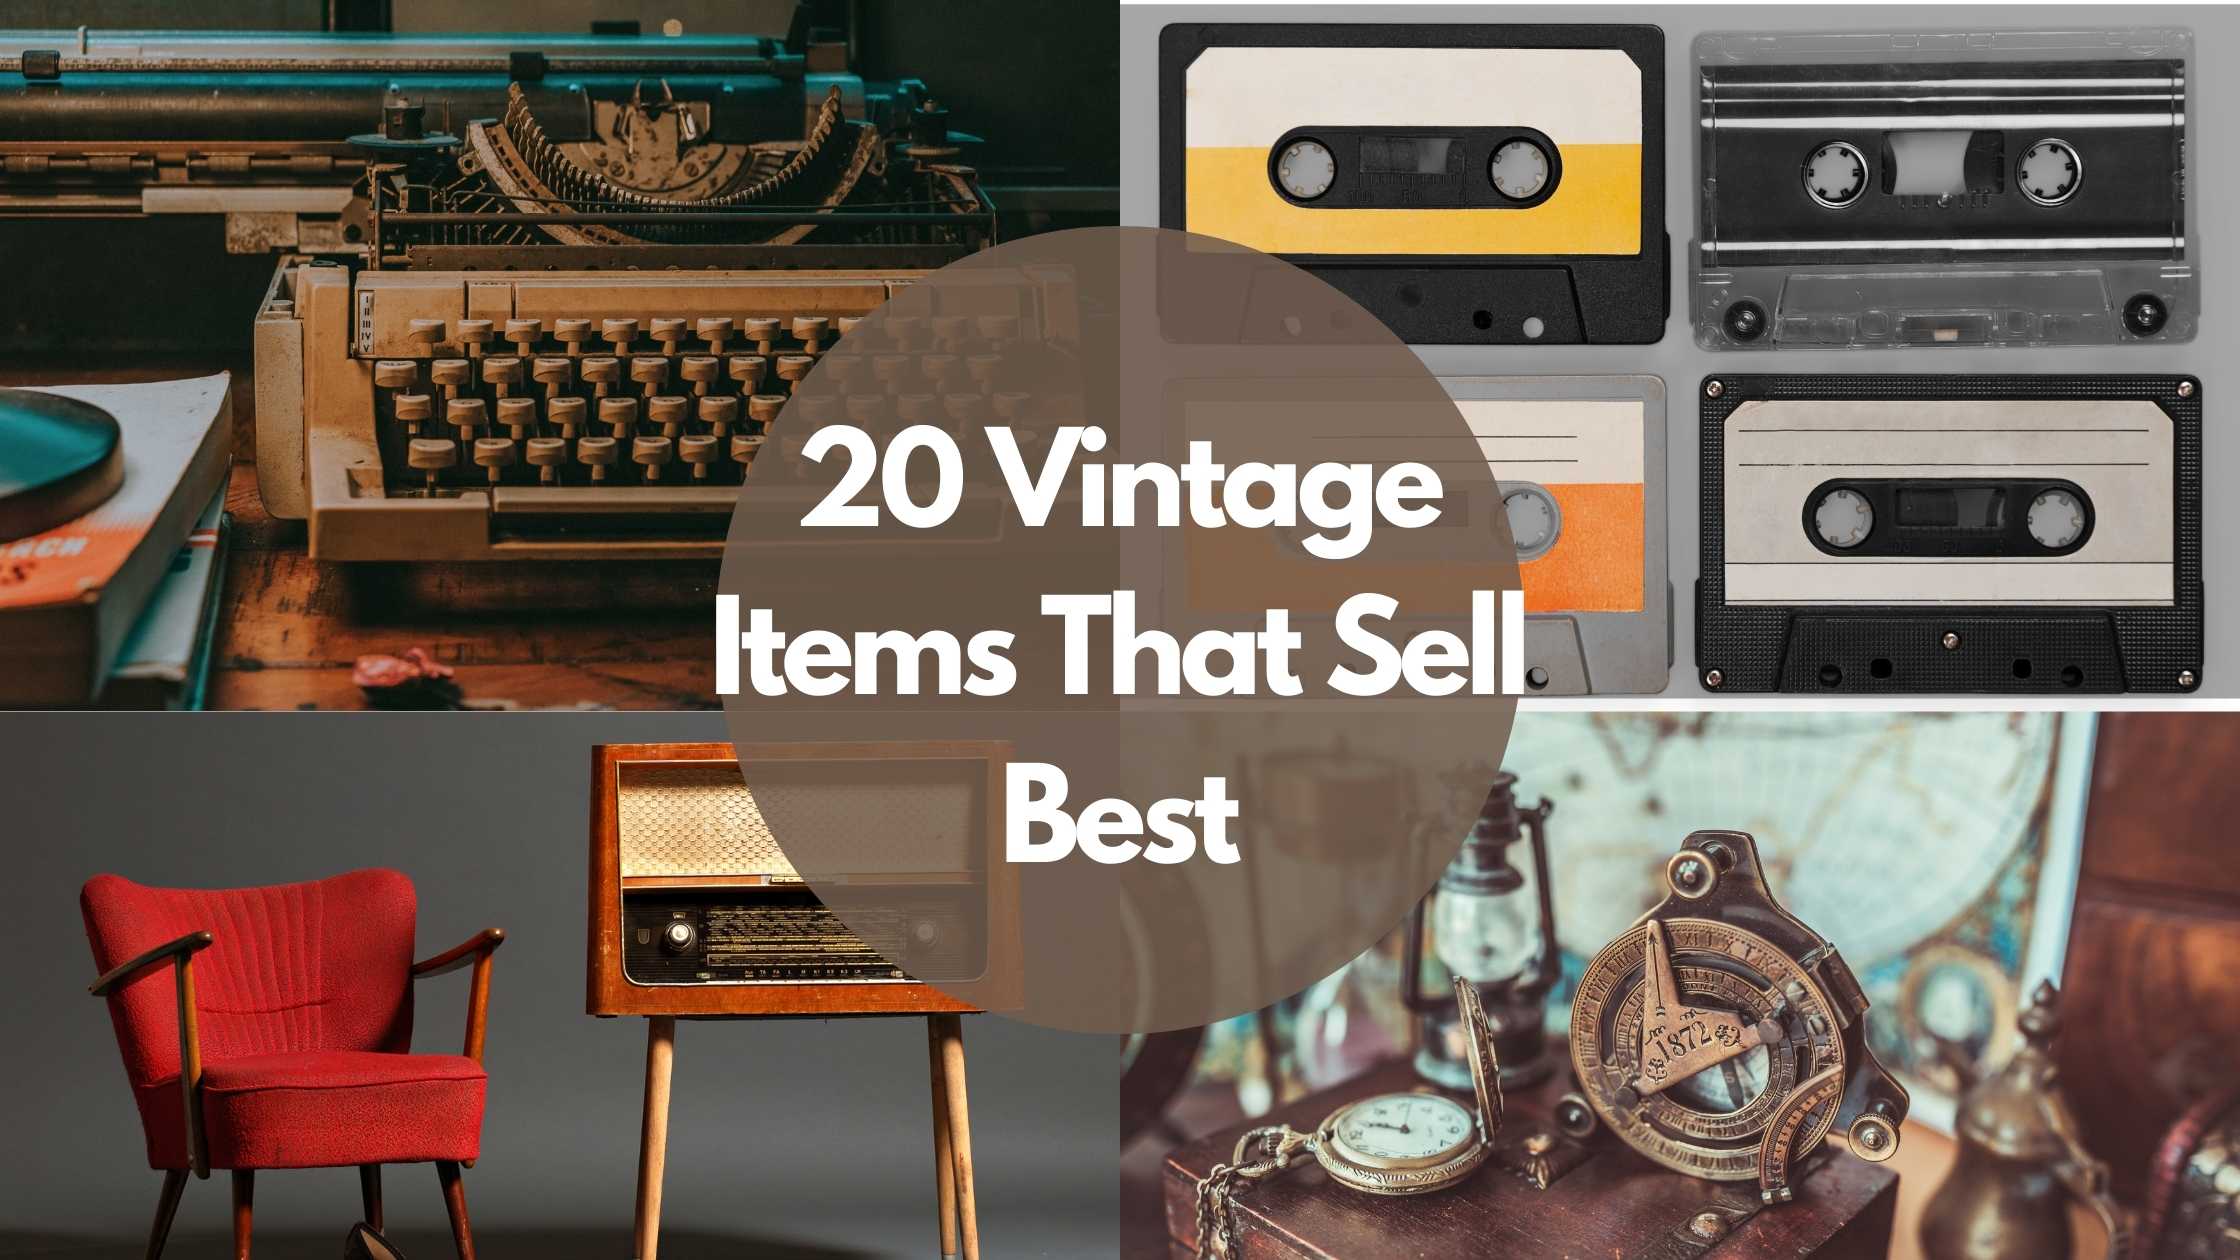 20 Vintage Items That Sell Best